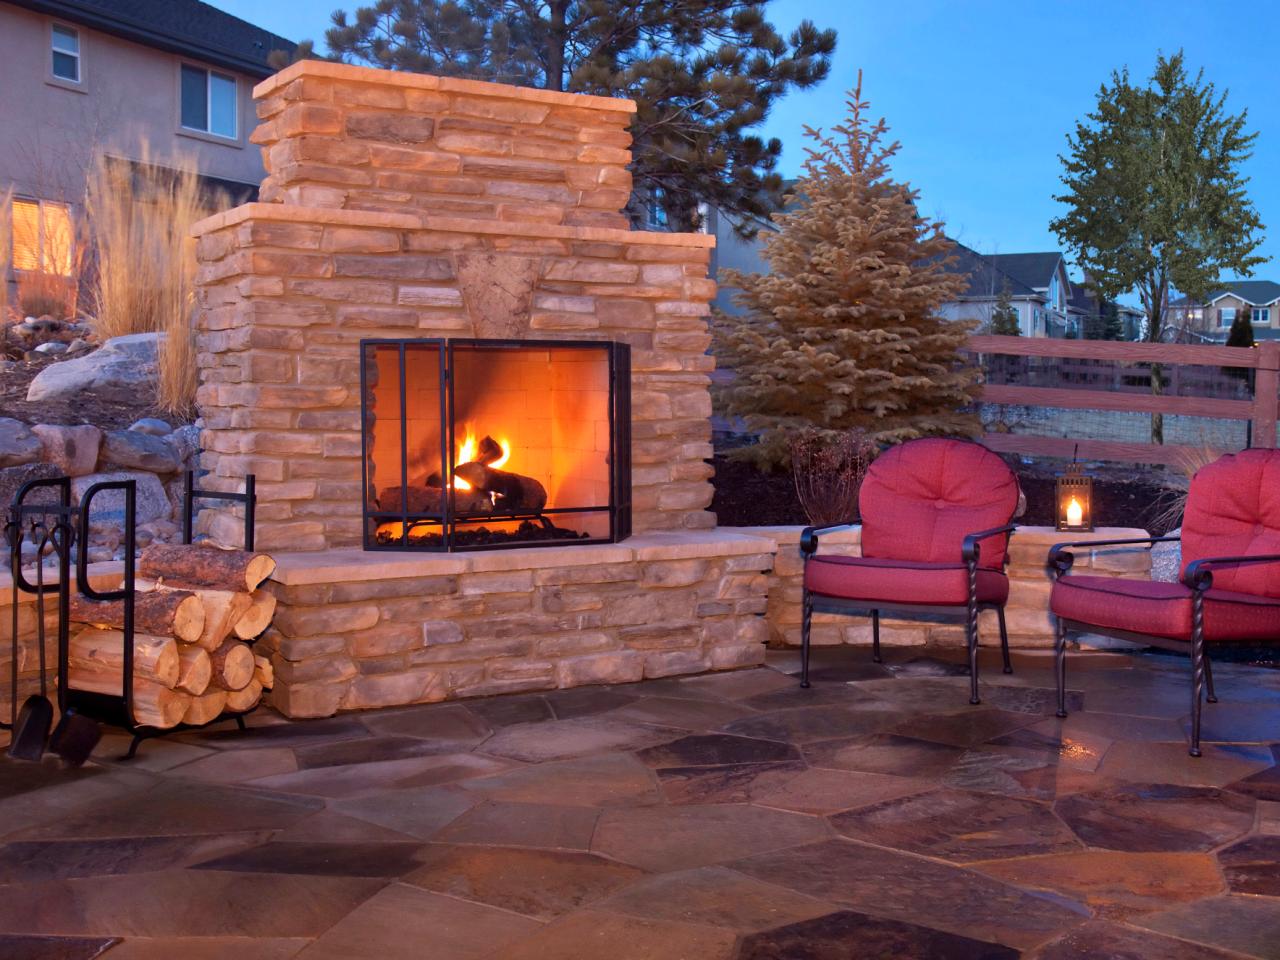 How To Build Outdoor Fireplace With Chimney